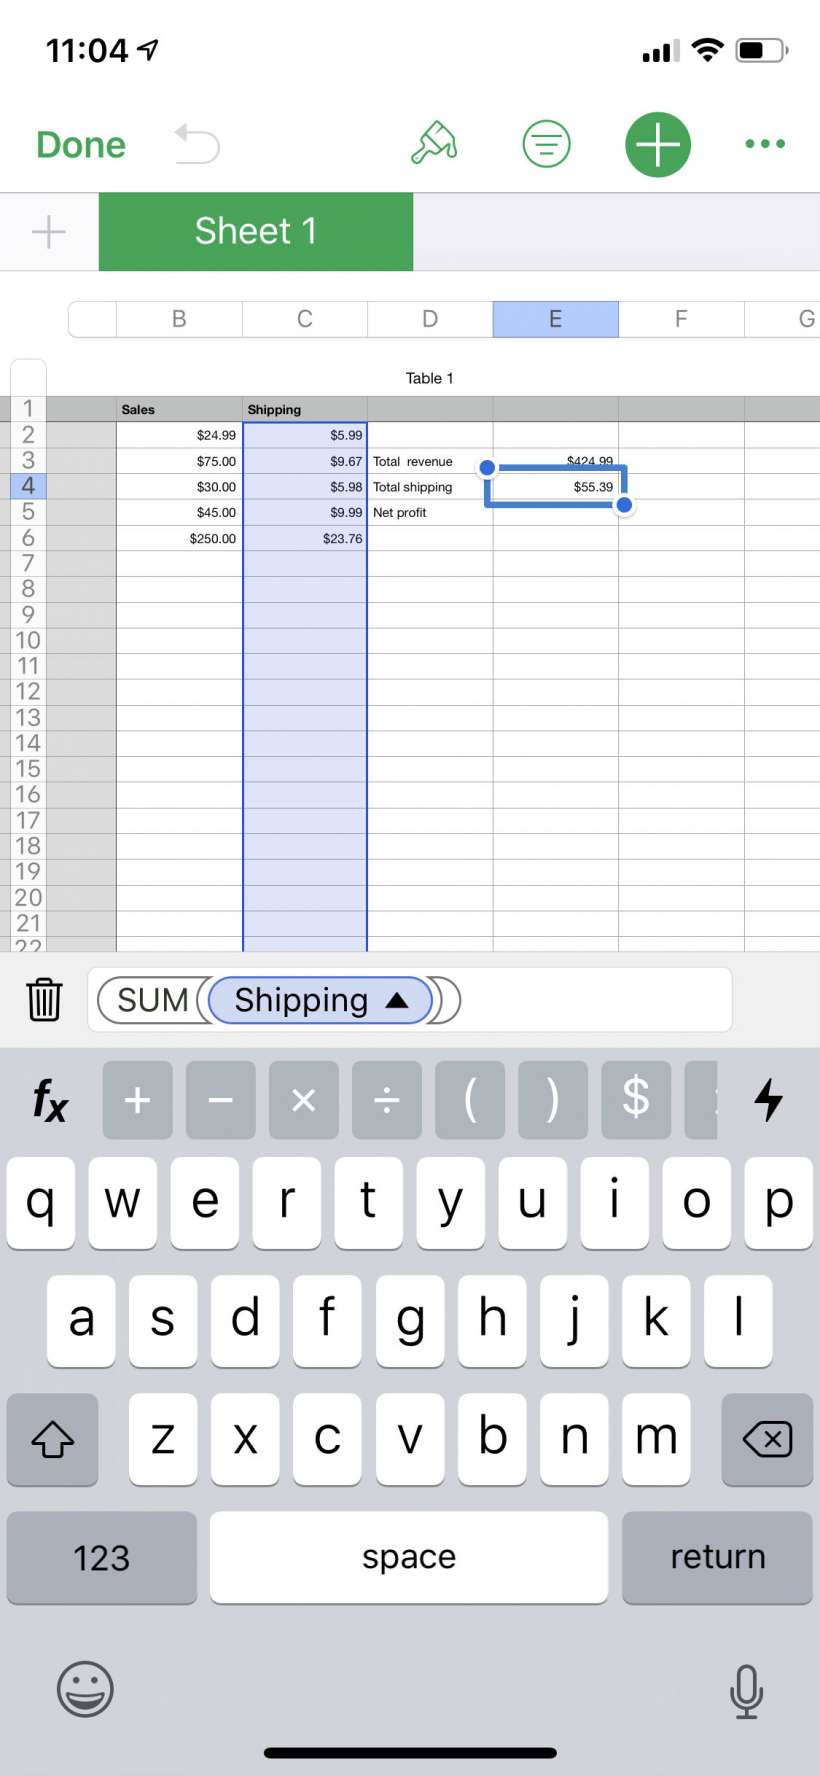 How to use formulas and functions in Numbers spreadsheets on iPhone and iPad.